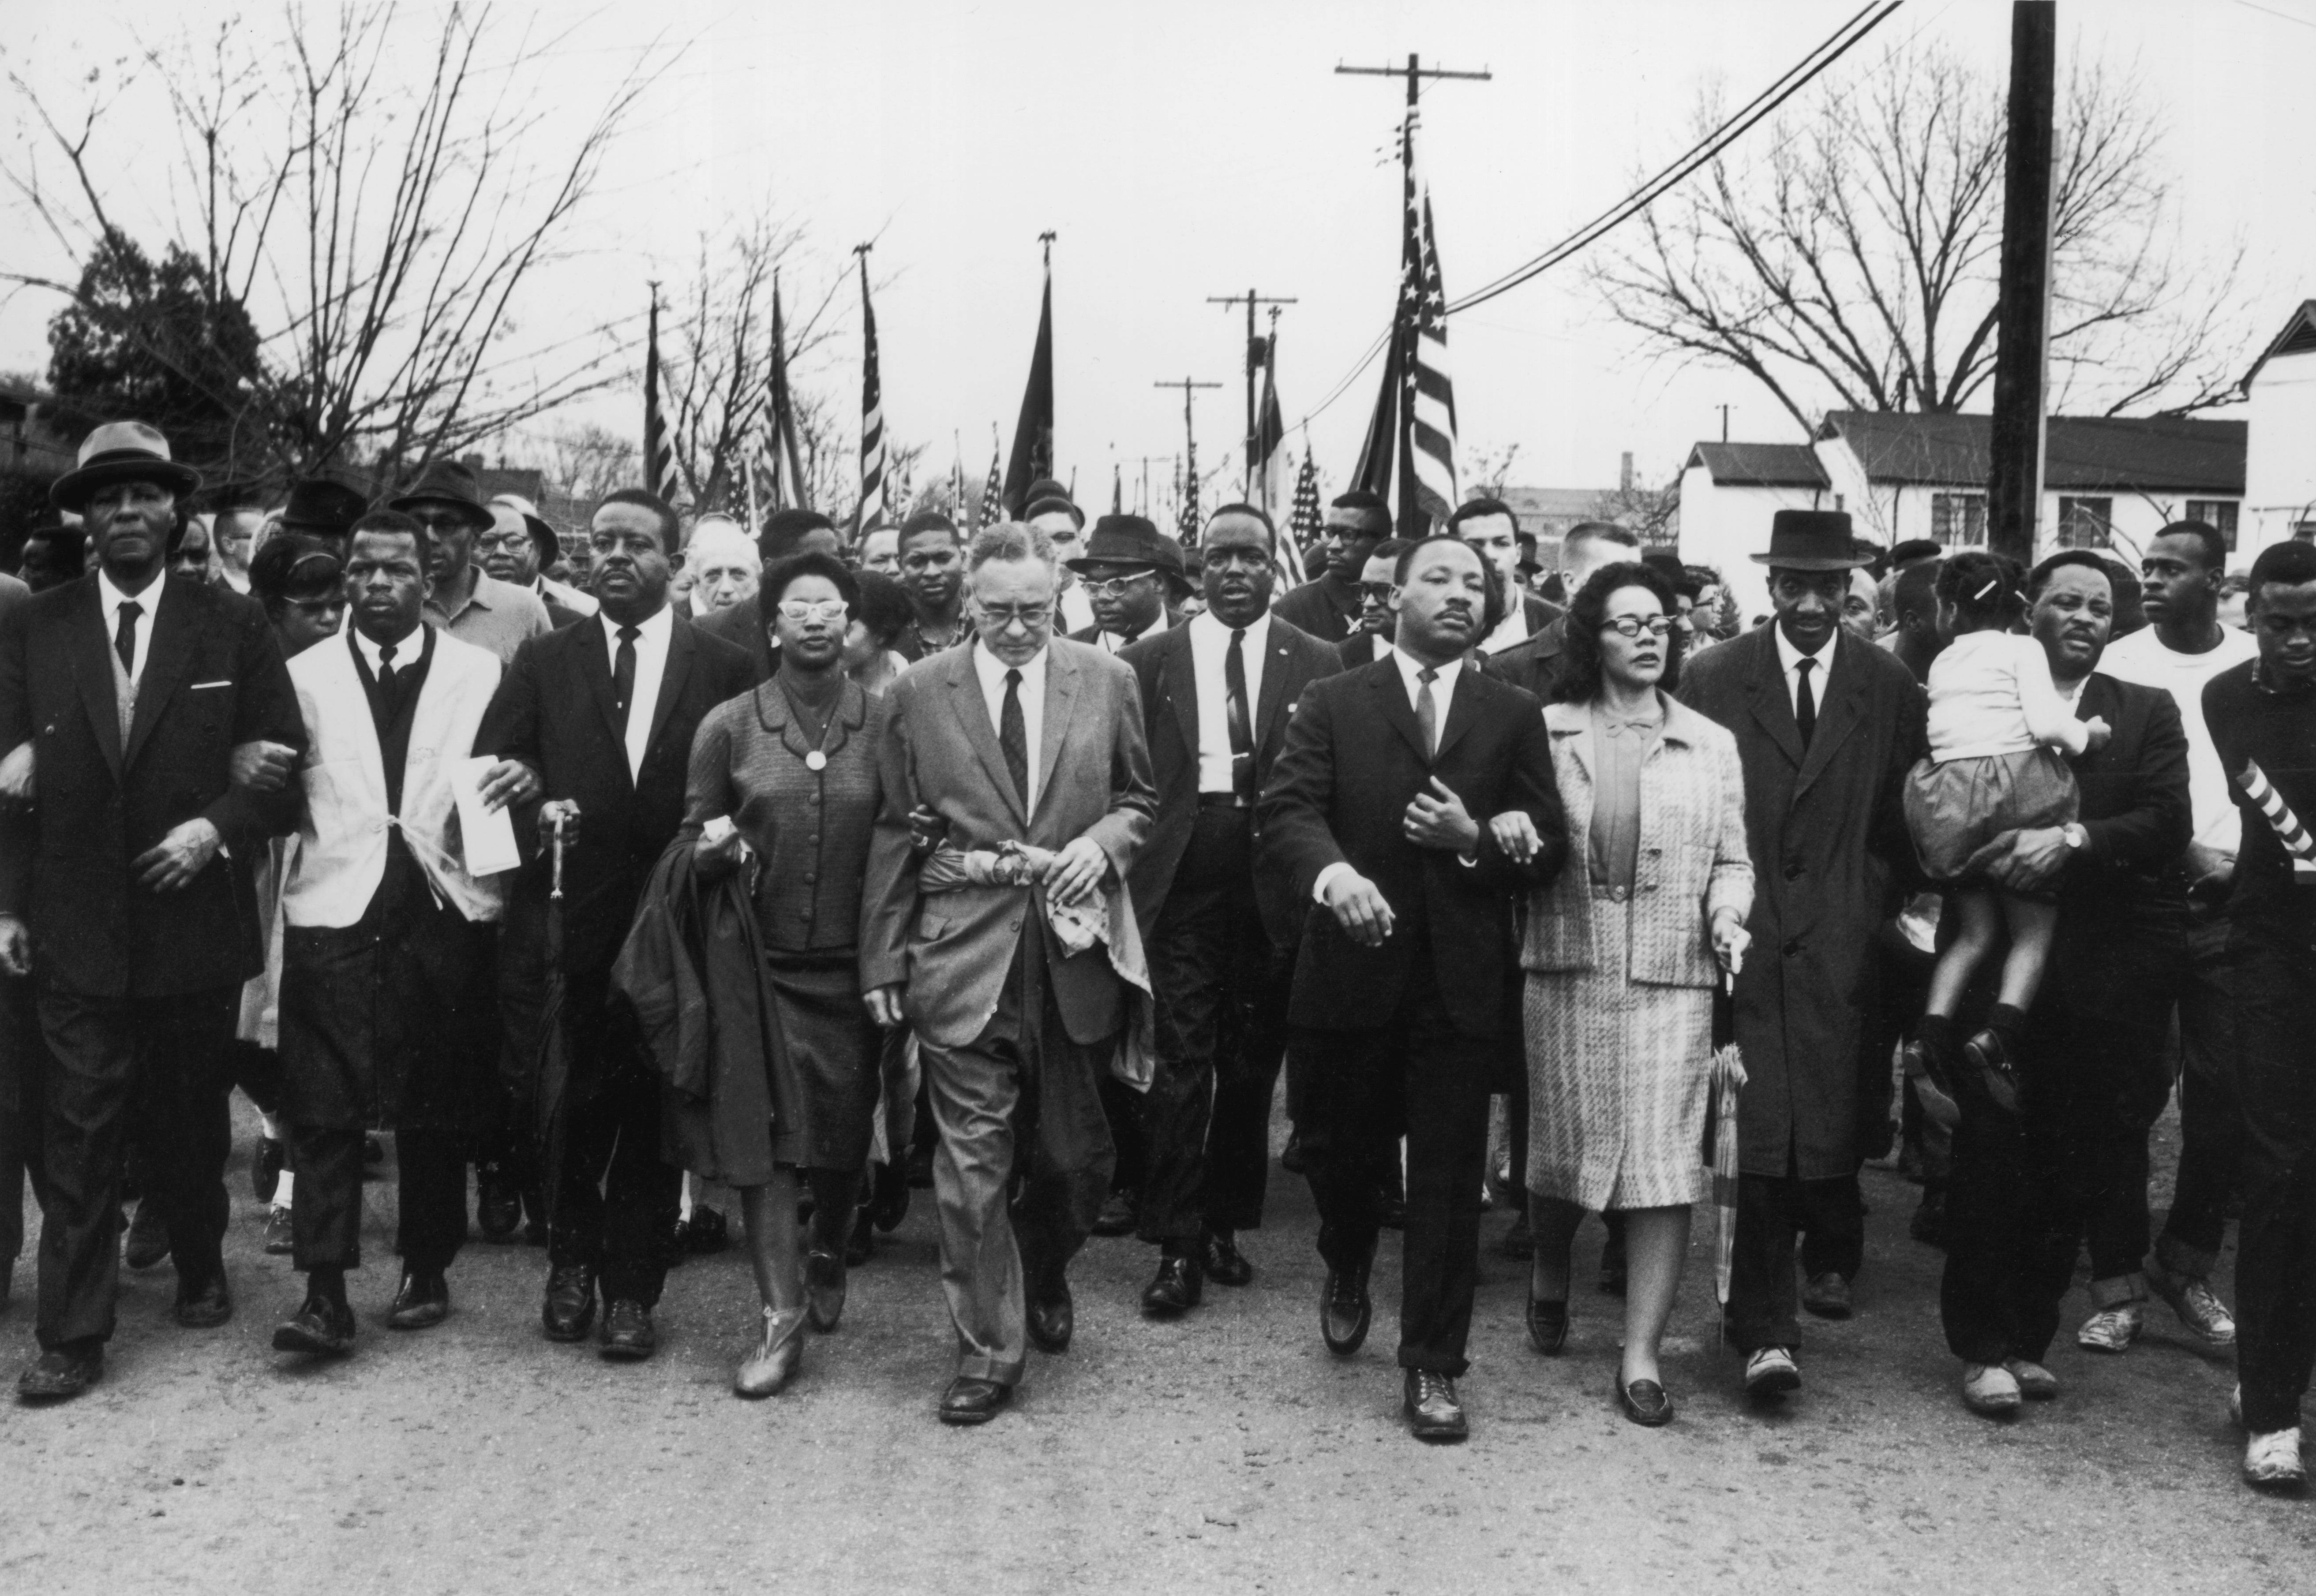 Martin Luther King Jr shown marching from Selma to Montgomery in 1965.